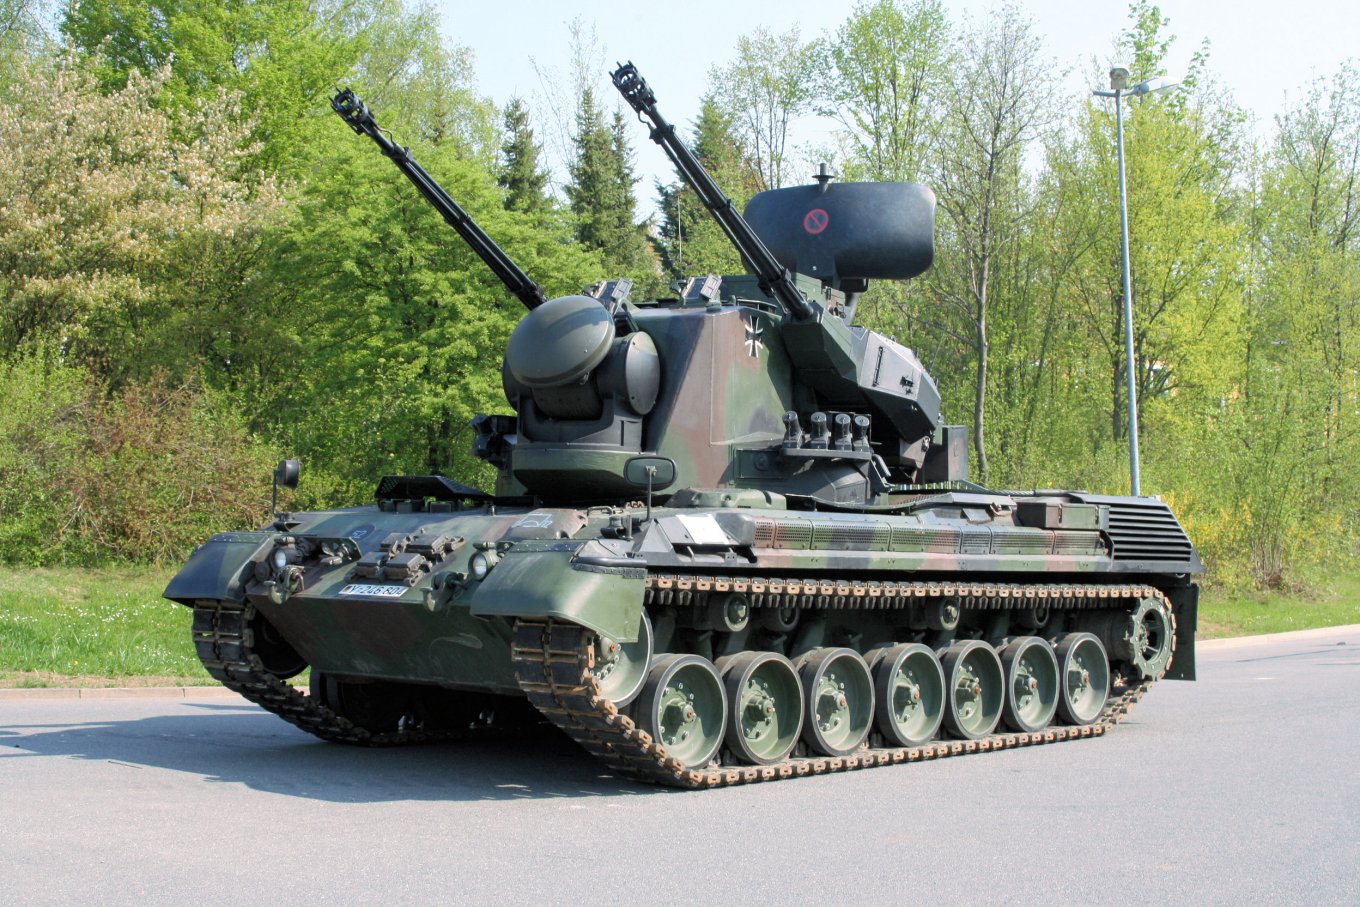 Gepard 1A2 of the German Army, Germany Changed its Position: Ukraine Receive Gepard Anti-Aircraft Tanks, Defense Express